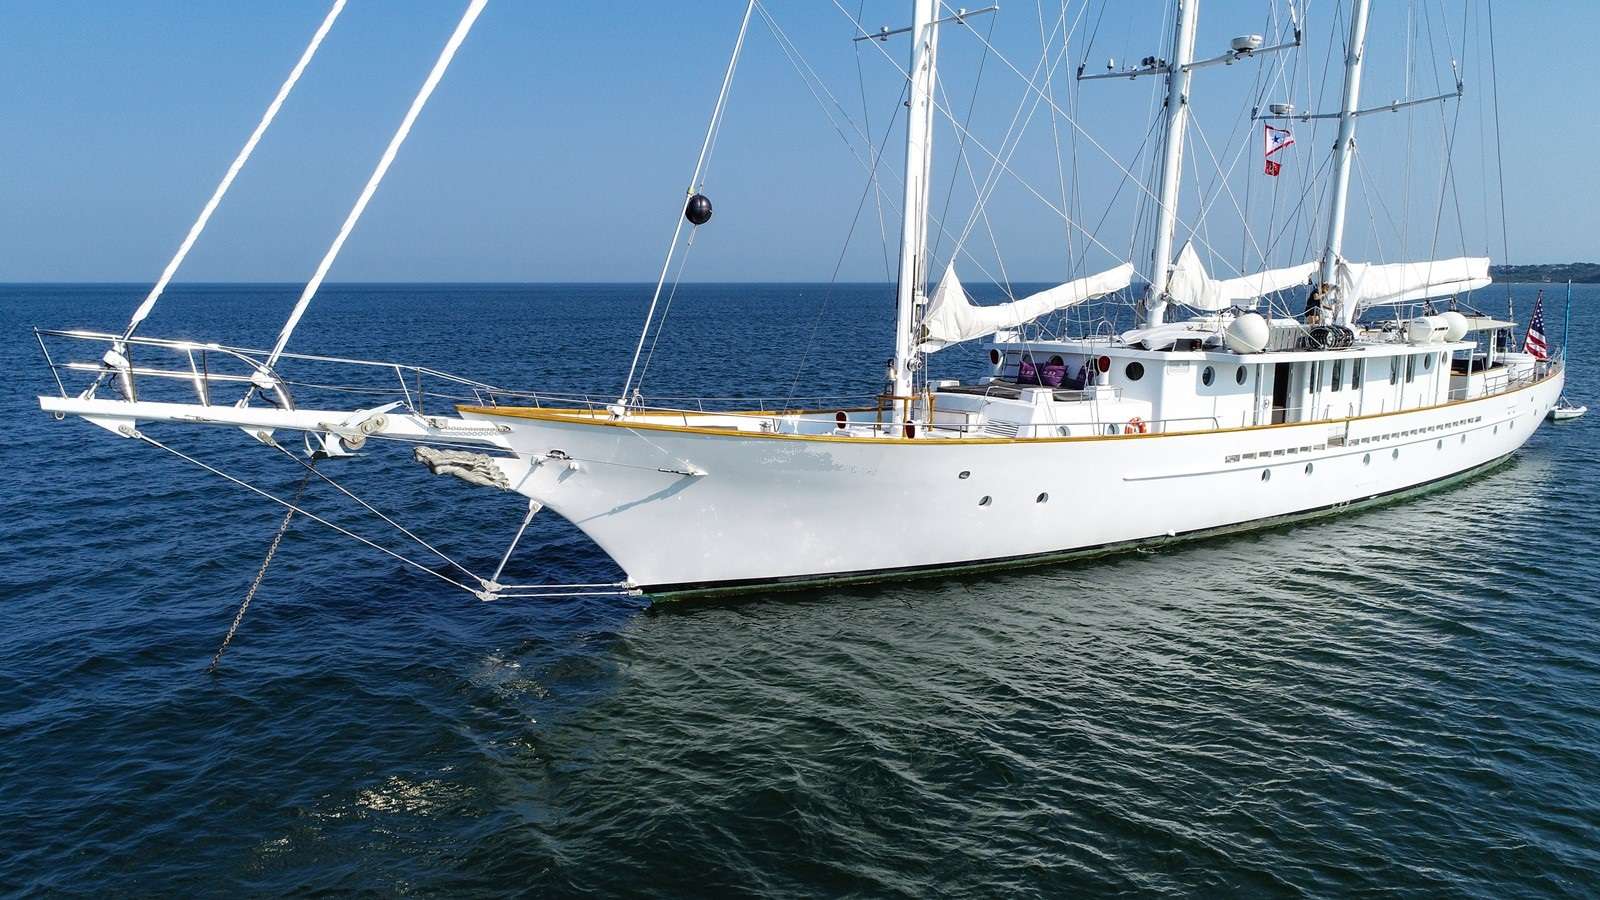 This stunning Tri-Masted Schooner is the true definition of a Classic beauty and as a Coast Guard Certified Passenger Vessel offers capabilities very few other yachts in the world can match.  She is ideal for those looking for that perfect private Family Excursion, Corporate Event or Brand Experience / Activation.  Sleeping up to 36 guests and Certified to carry up to 100 passengers for Day Charter experiences, this rare offering is one of the most versatile Sailing Superyachts in the world.  With a stellar charter history dating back to 2000, this incredible yachting lifestyle / hospitality platform can host a variety of both private charter as well as lifestyle and corporate entertainment experiences. 
 